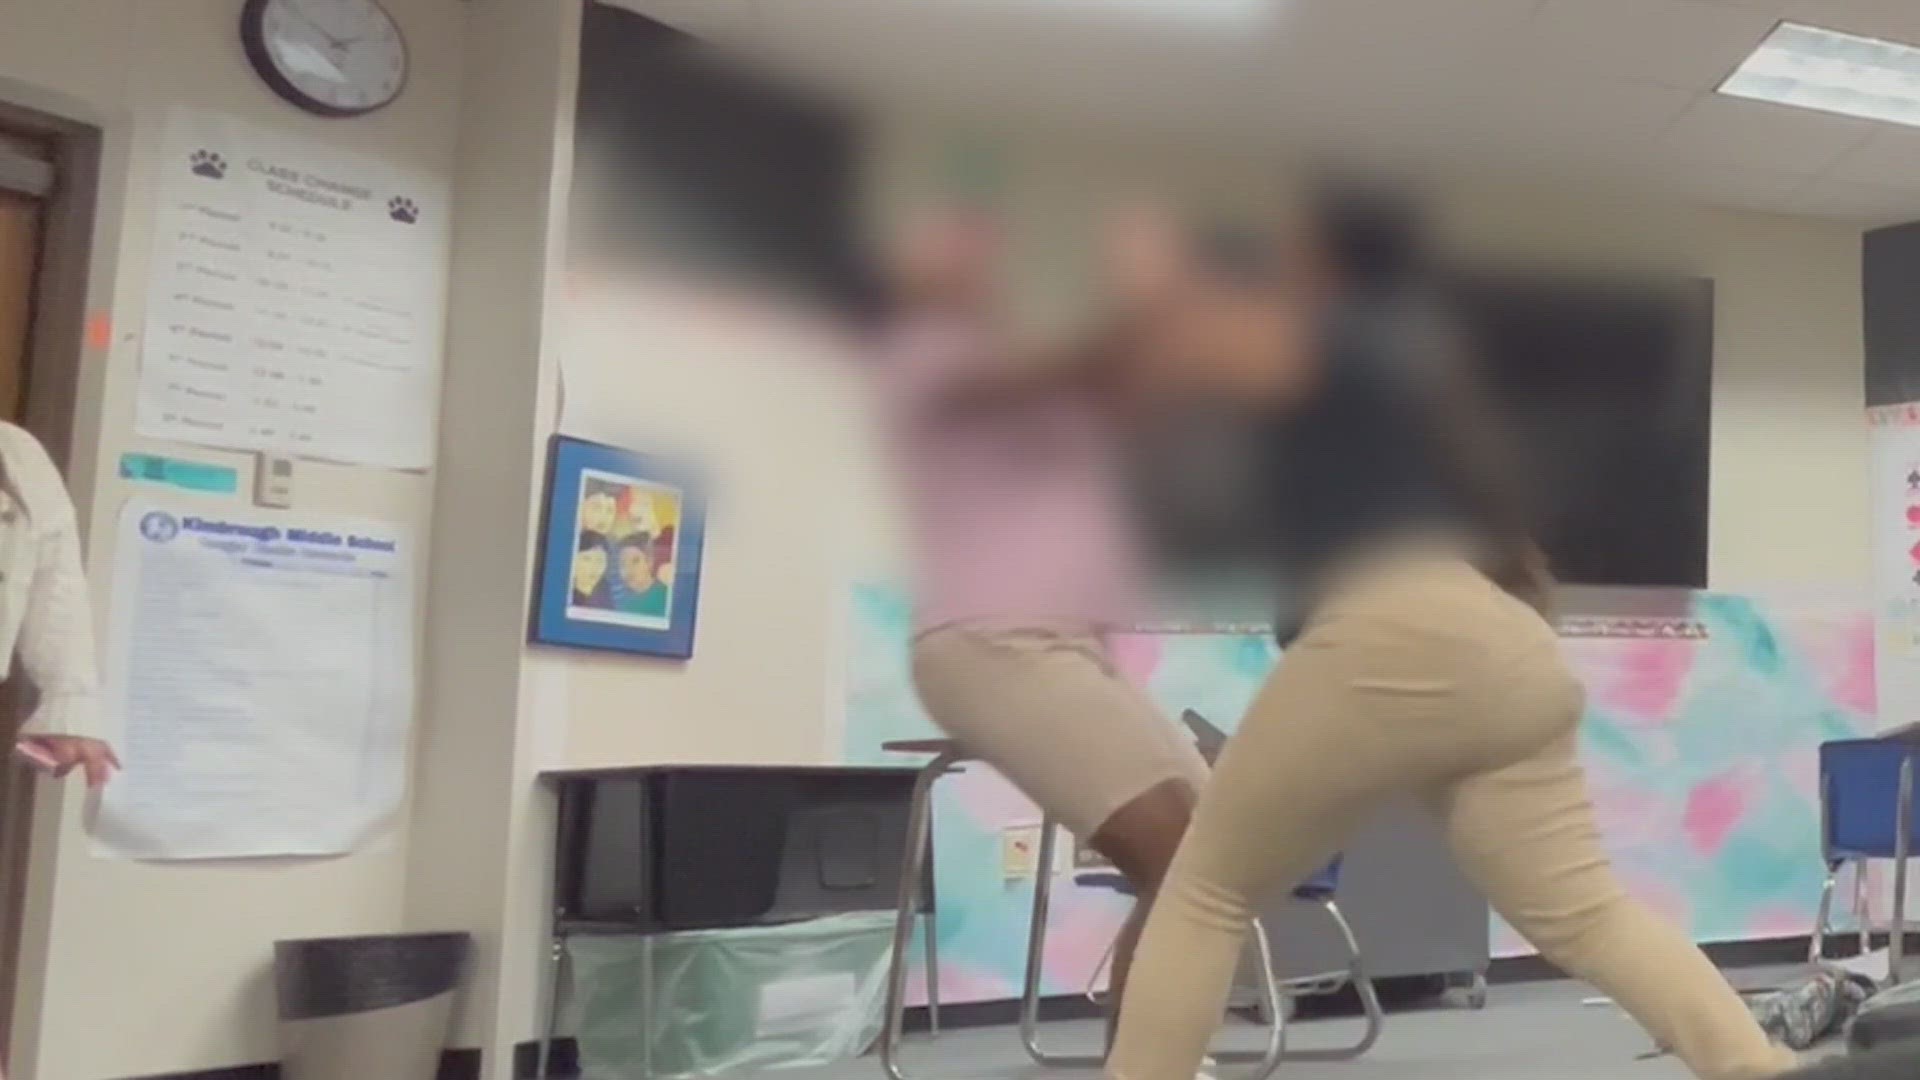 Texas teacher who allegedly allowed fights in class arrested | wfaa.com